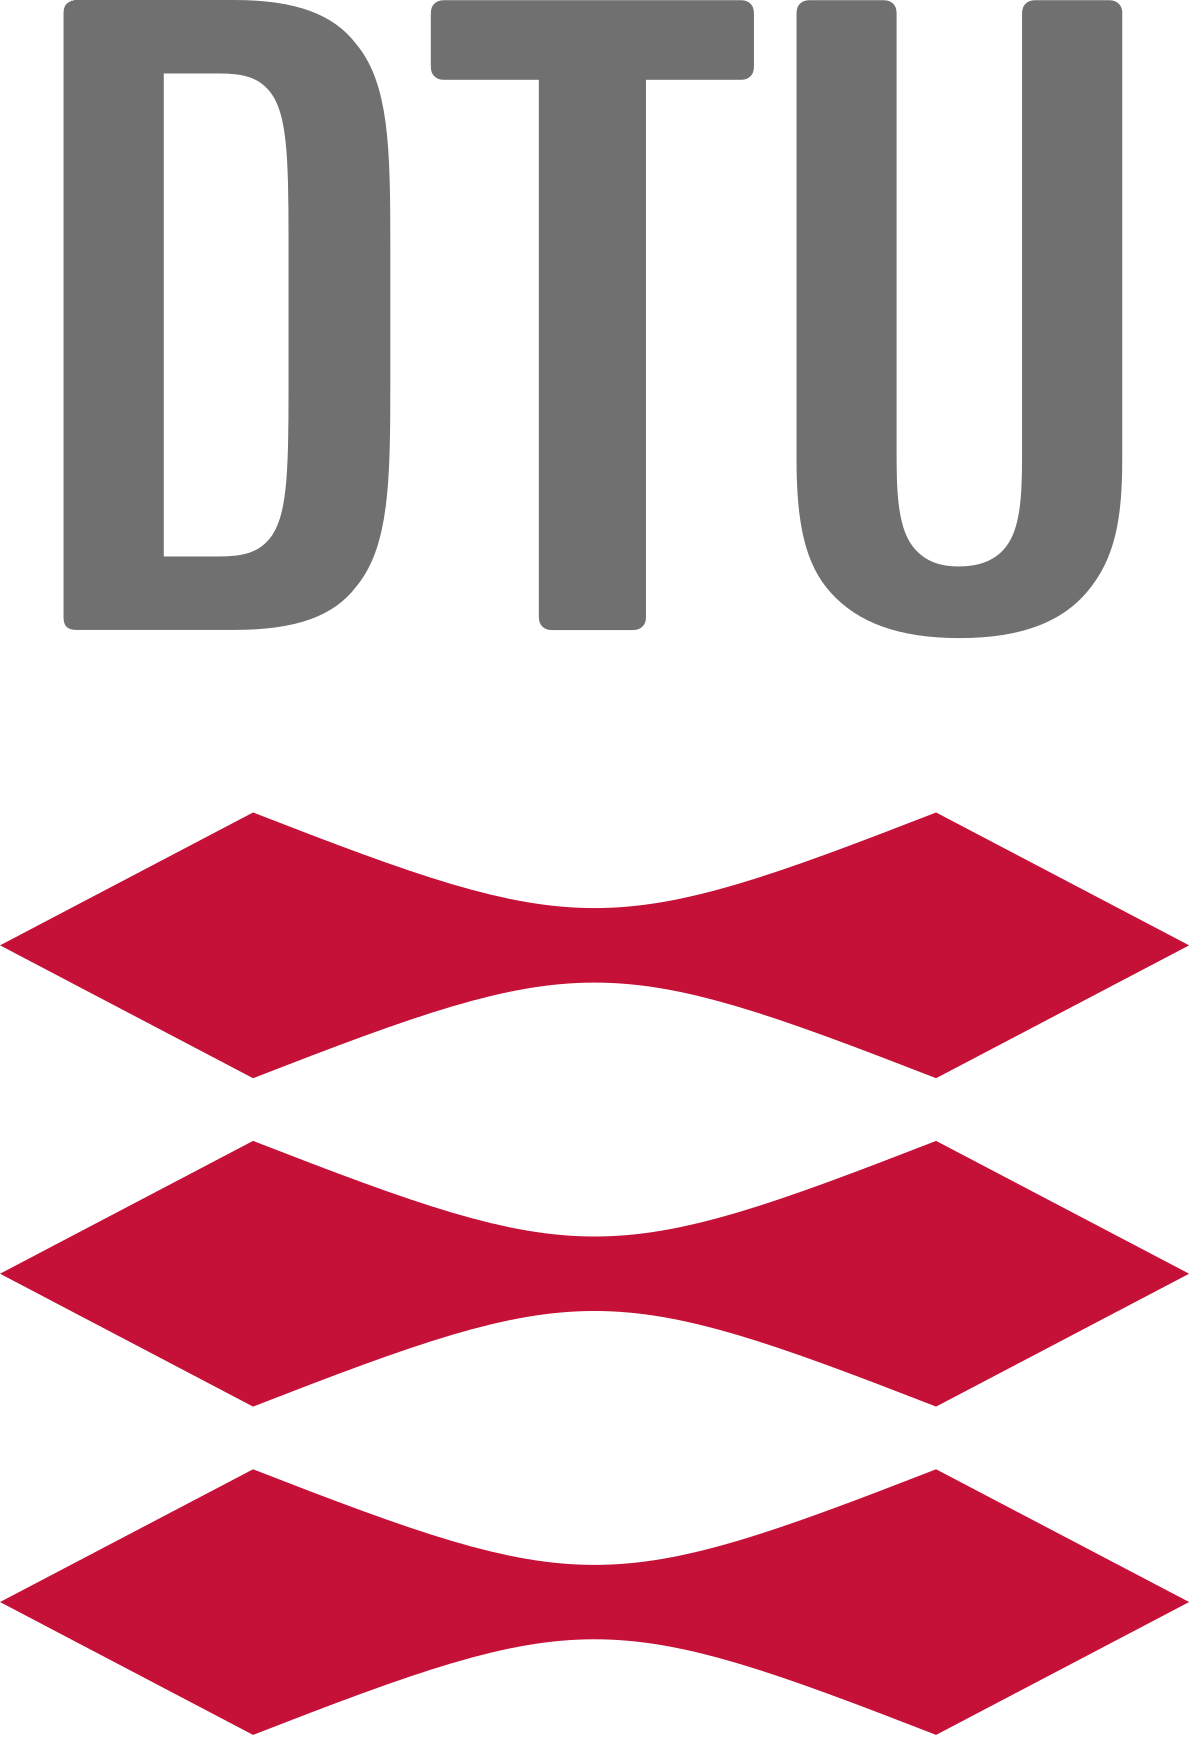 Grey letters DTU above a shape that repeats 3 times vertically. The shape is in red and looks approximately like a bowtie but with pointed ends at either side.